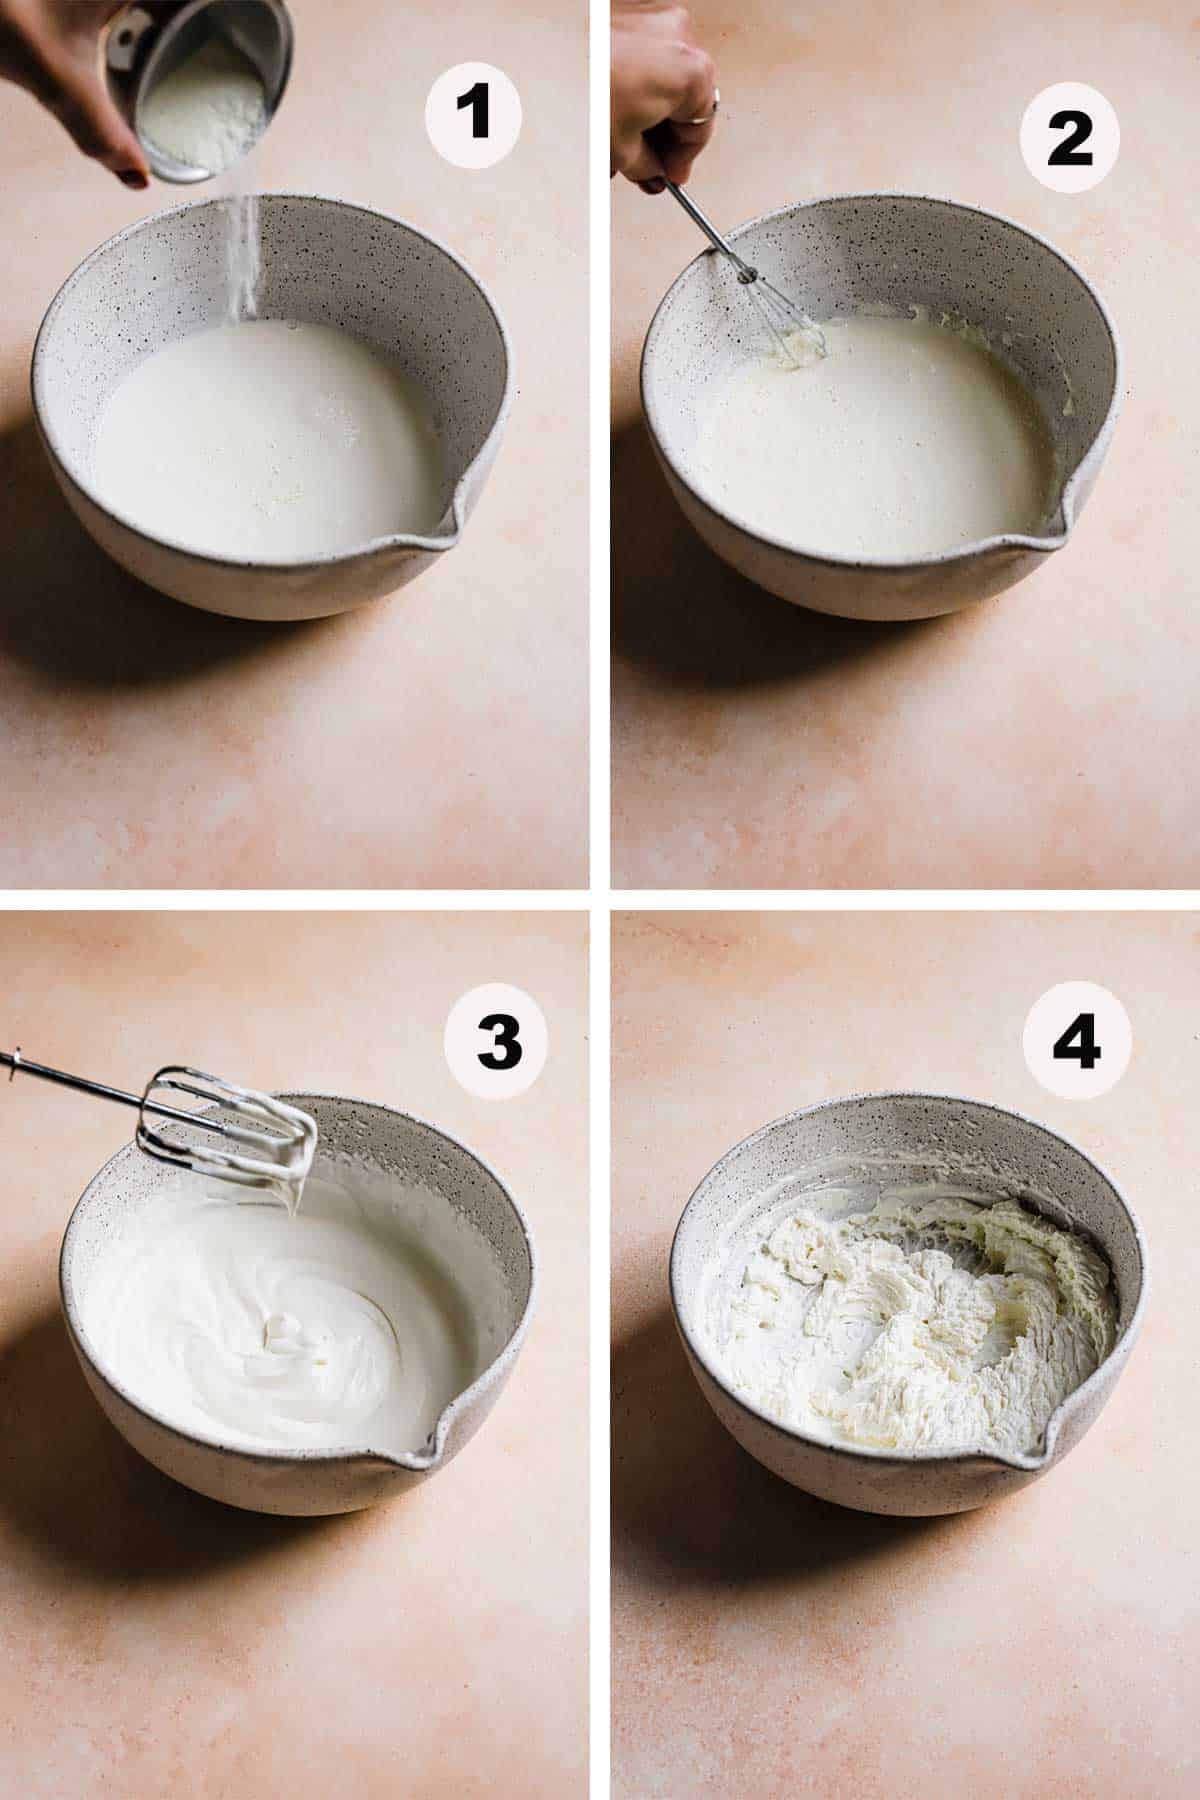 A step by step instruction how to make stabilized heavy cream. Sprinkle over dried milk powder and whip until soft pick forms. Add sugar and whip to stiff pick.